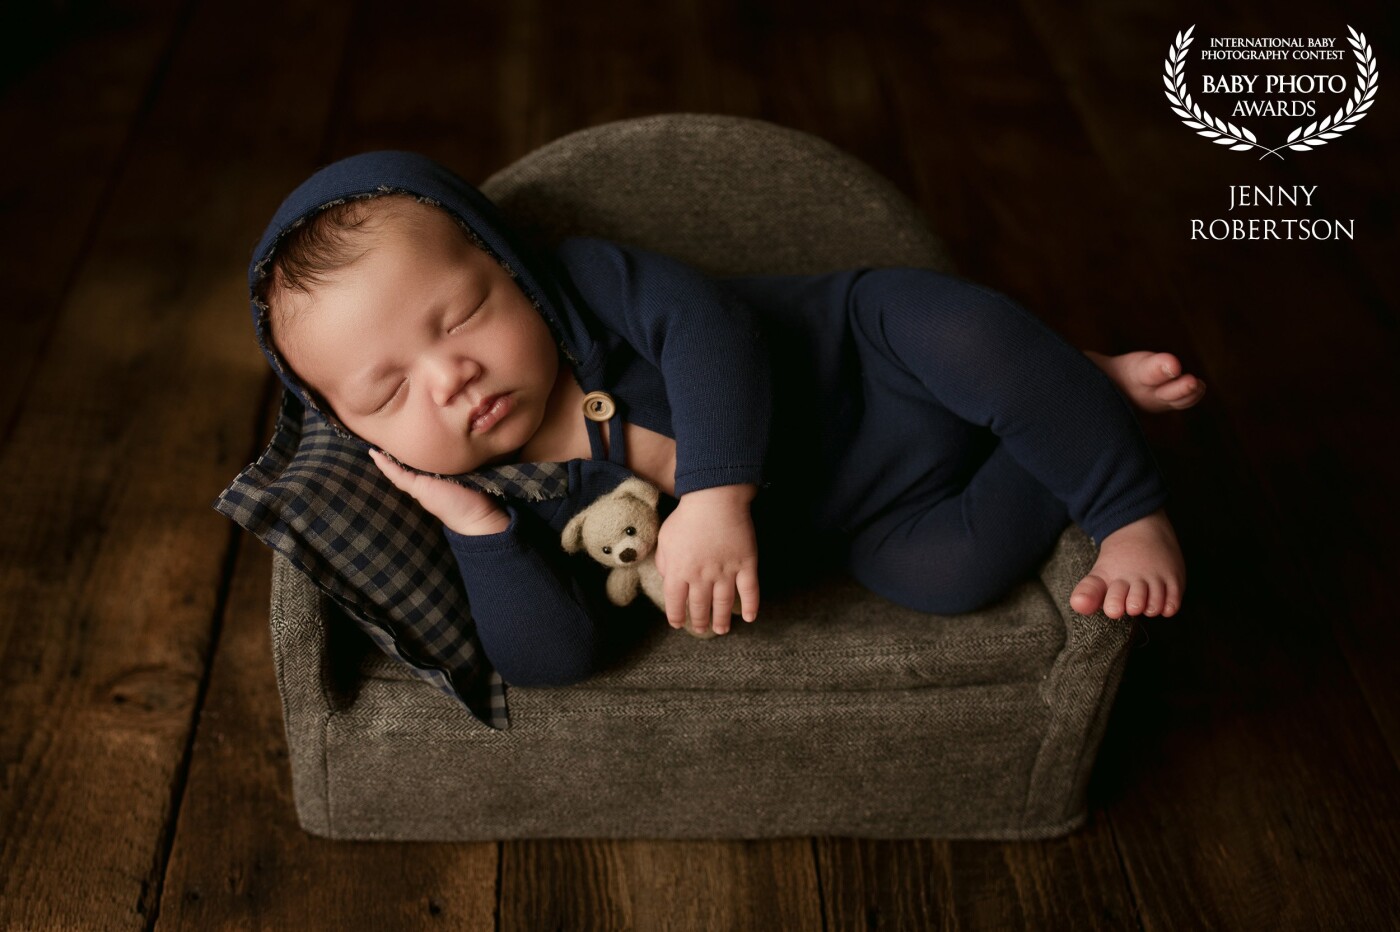 Little Liam - I was so excited to get this image with 1-month-old Liam. He looks so sweet and relaxed cuddled up on the couch with his teddy bear. 